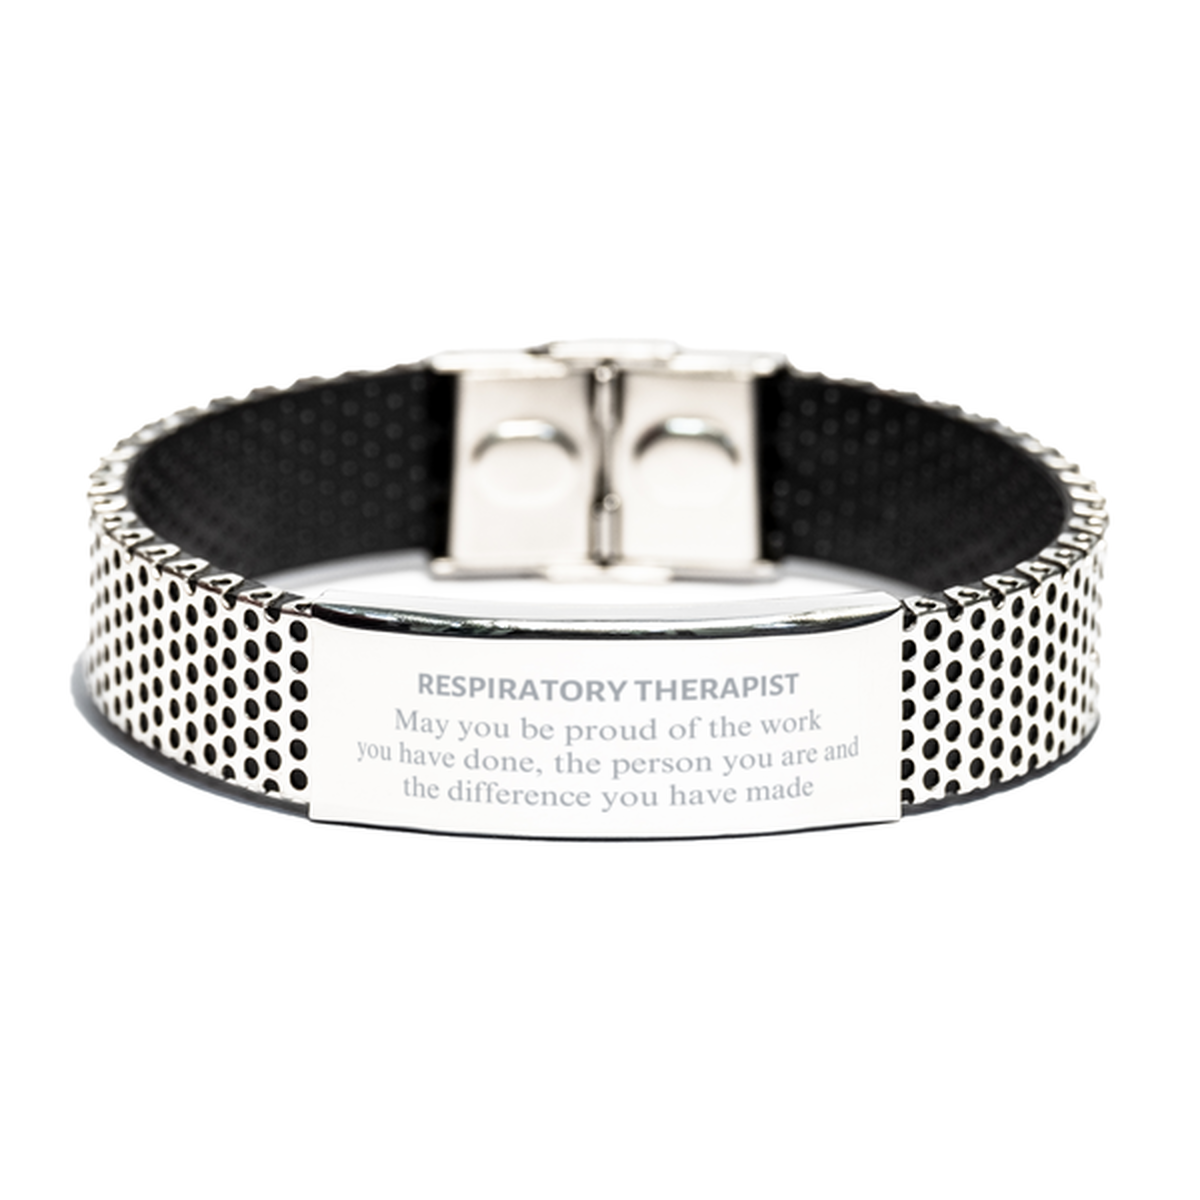 Respiratory Therapist May you be proud of the work you have done, Retirement Respiratory Therapist Stainless Steel Bracelet for Colleague Appreciation Gifts Amazing for Respiratory Therapist